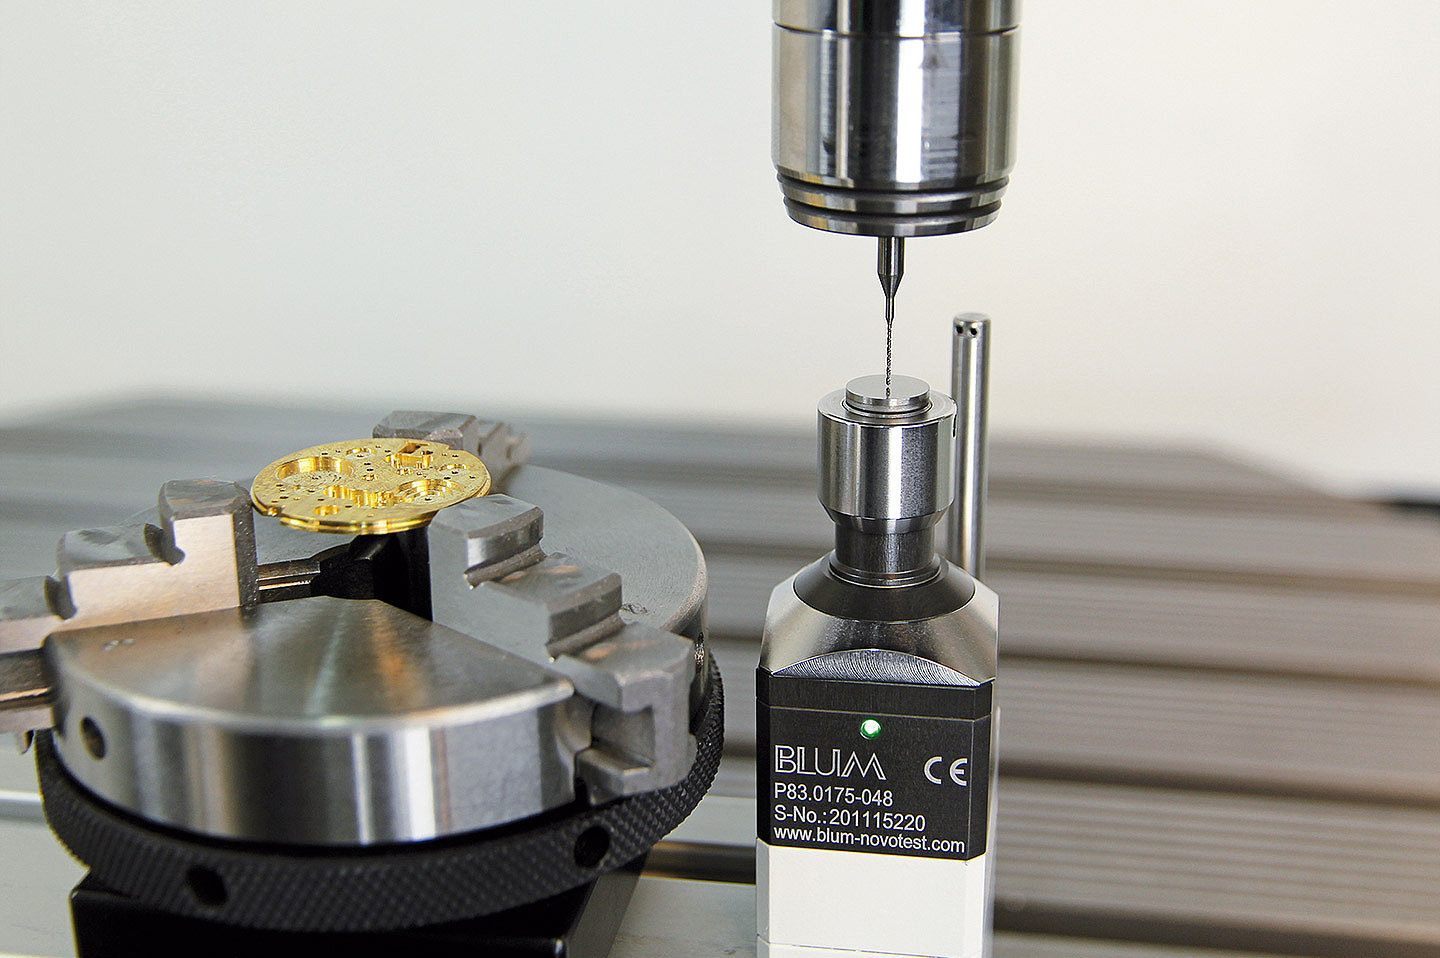 Tool length measurement and breakage detection in small machining centres